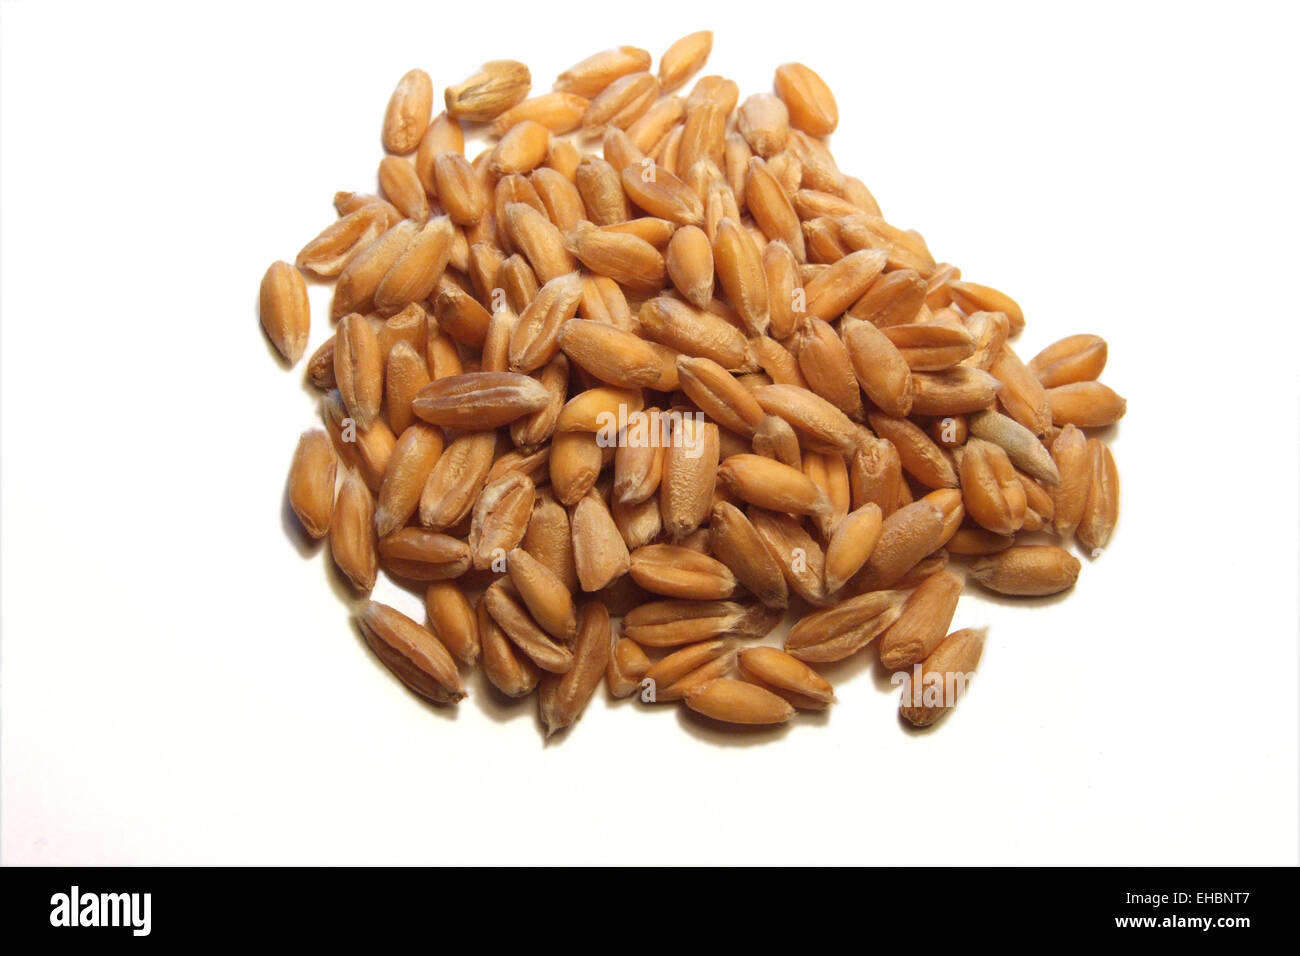 Cereal grains Stock Photo